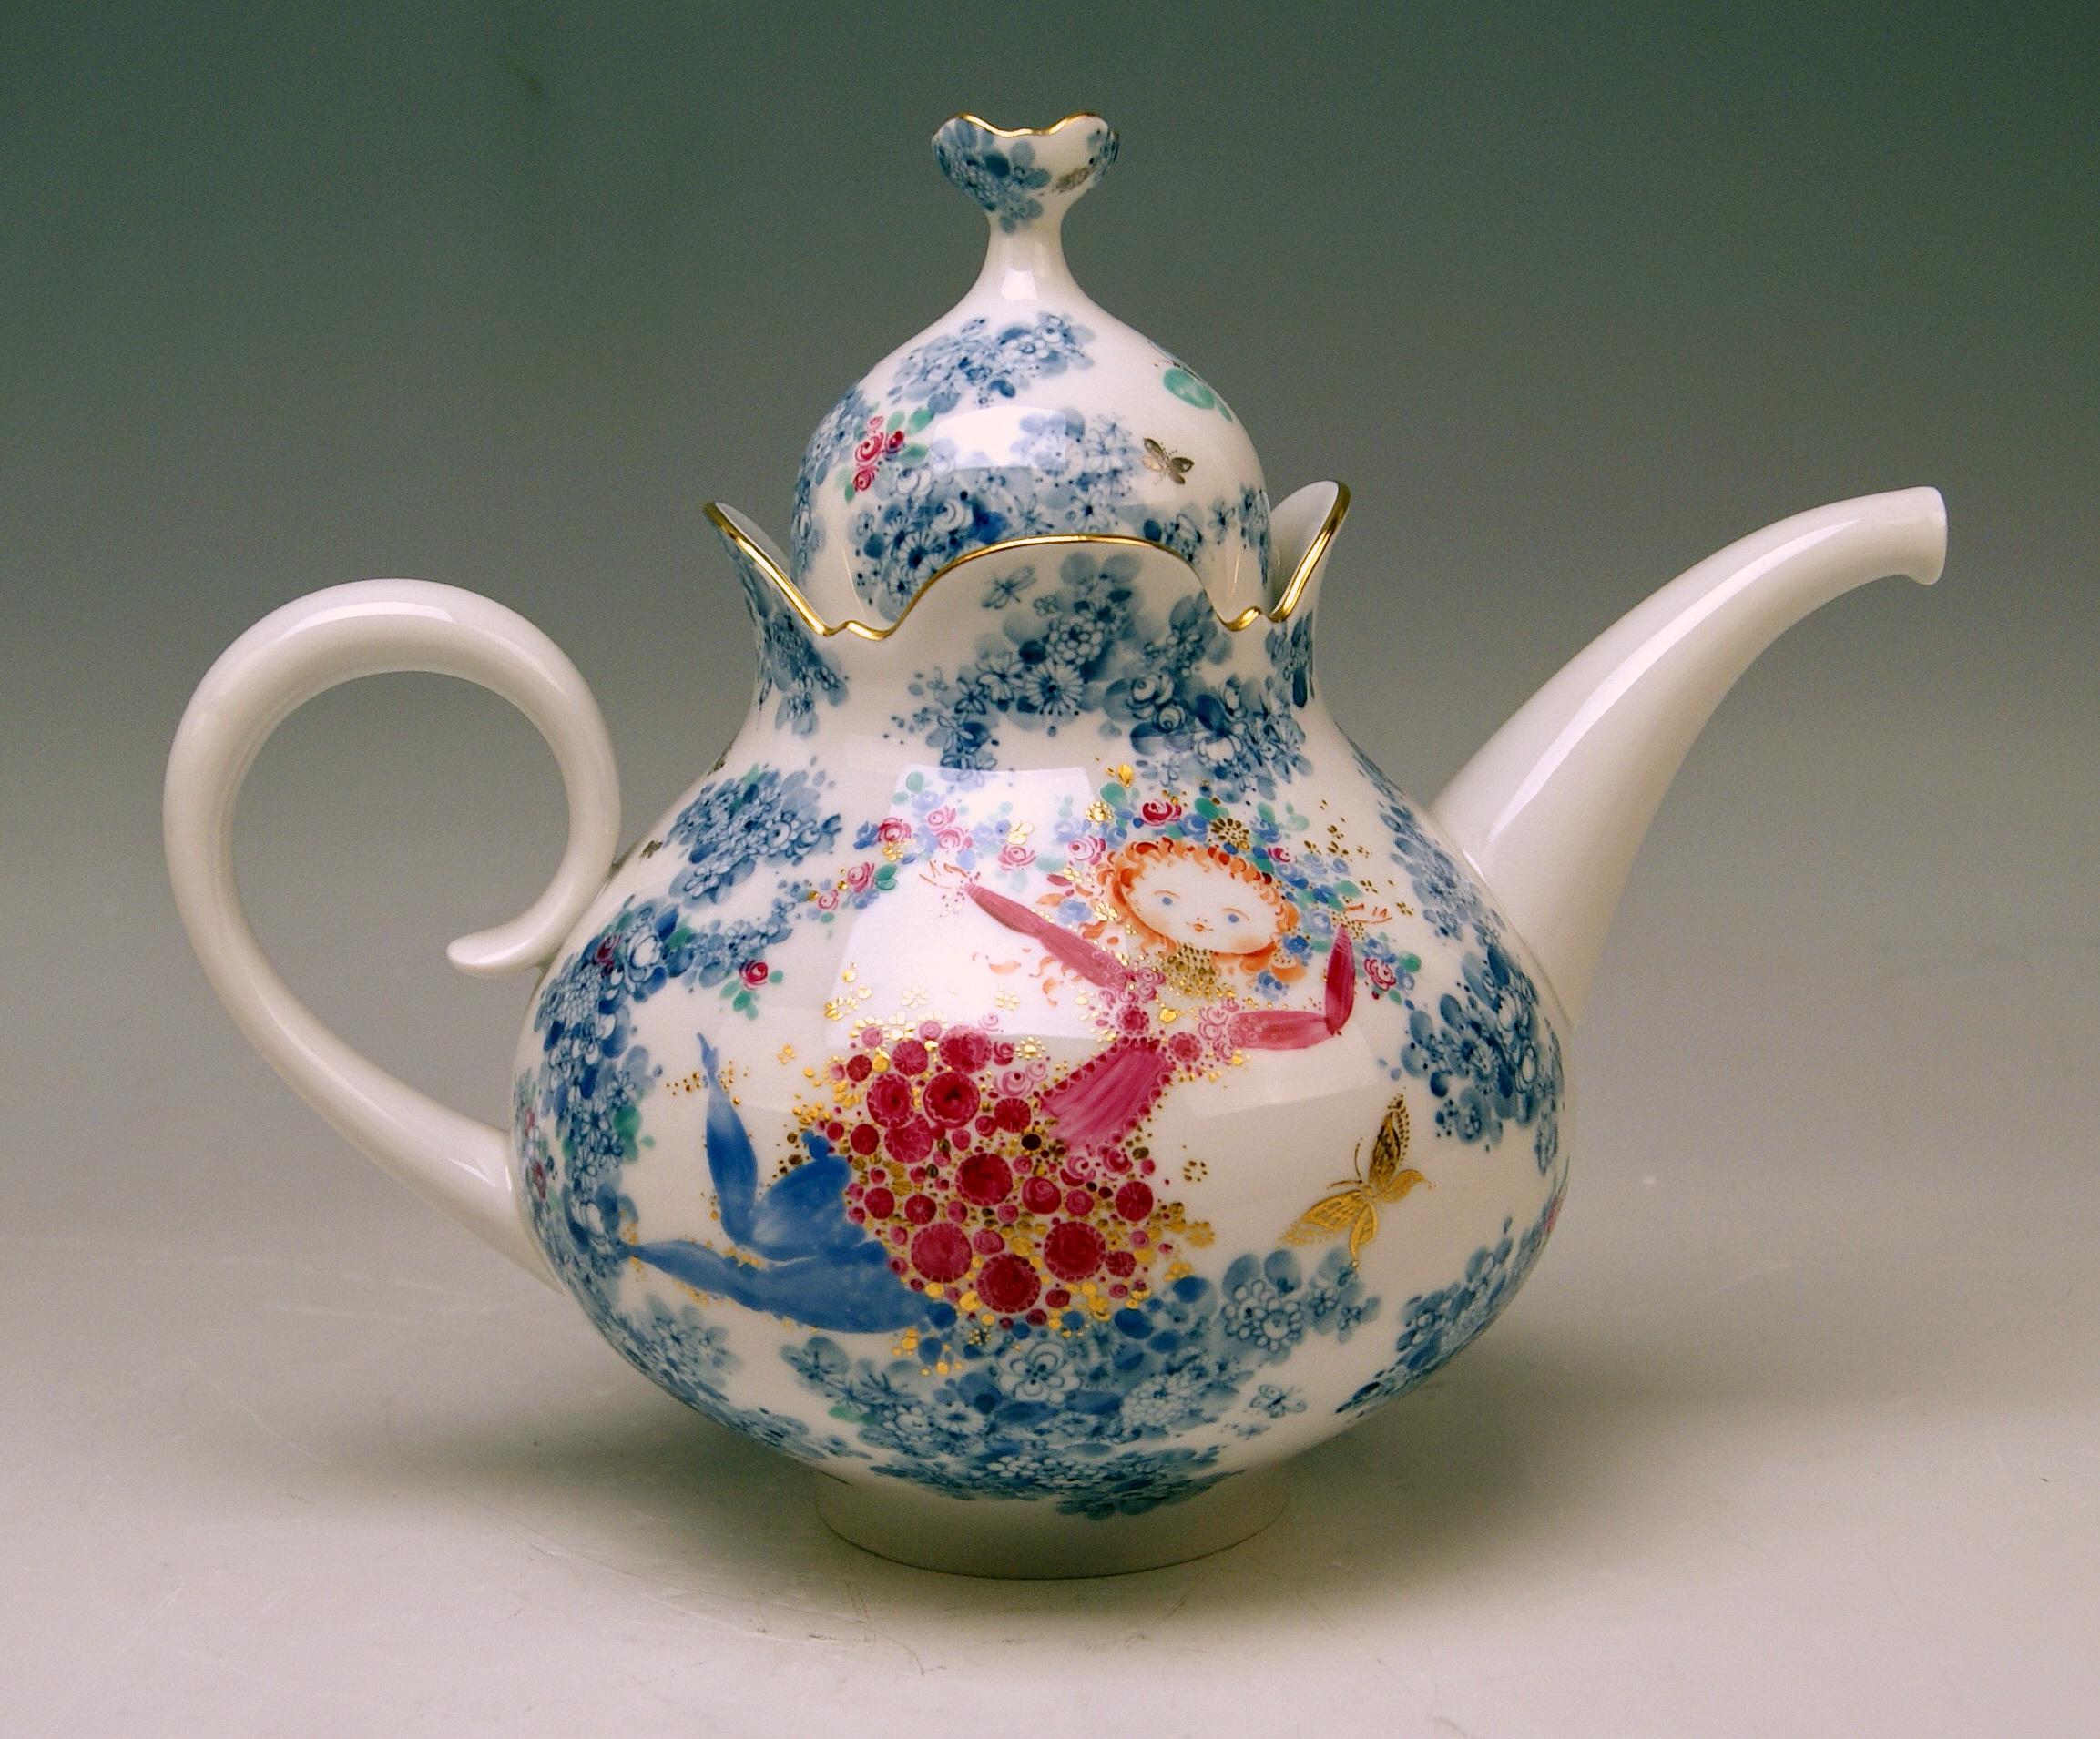 A splendid as well as rare Meissen tea pot:
White porcelain, multicolored pattern consisting of flowers' blossoms and figurines (Decor Sommernachtstraum in German = Summer night's dream / decor number 680691).
Golden painted edges, multicolored